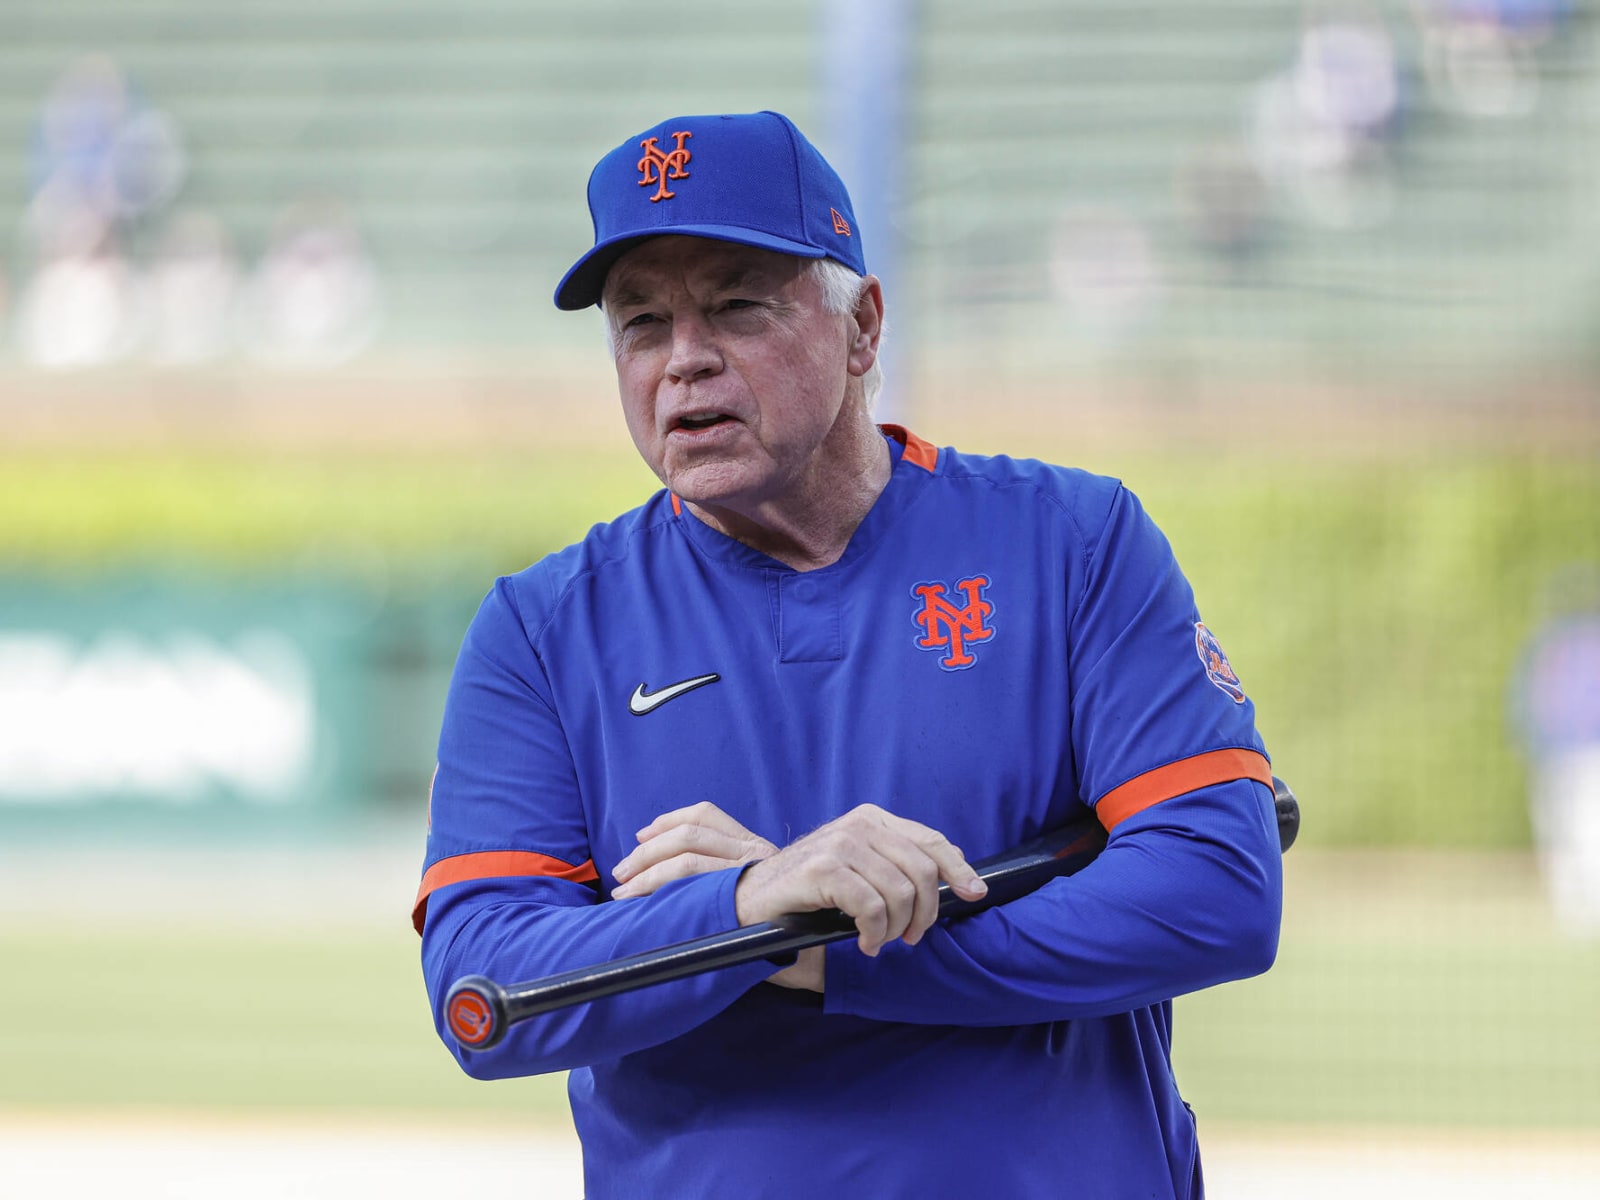 Buck Showalter made a huge blunder in the AL Wild Card game